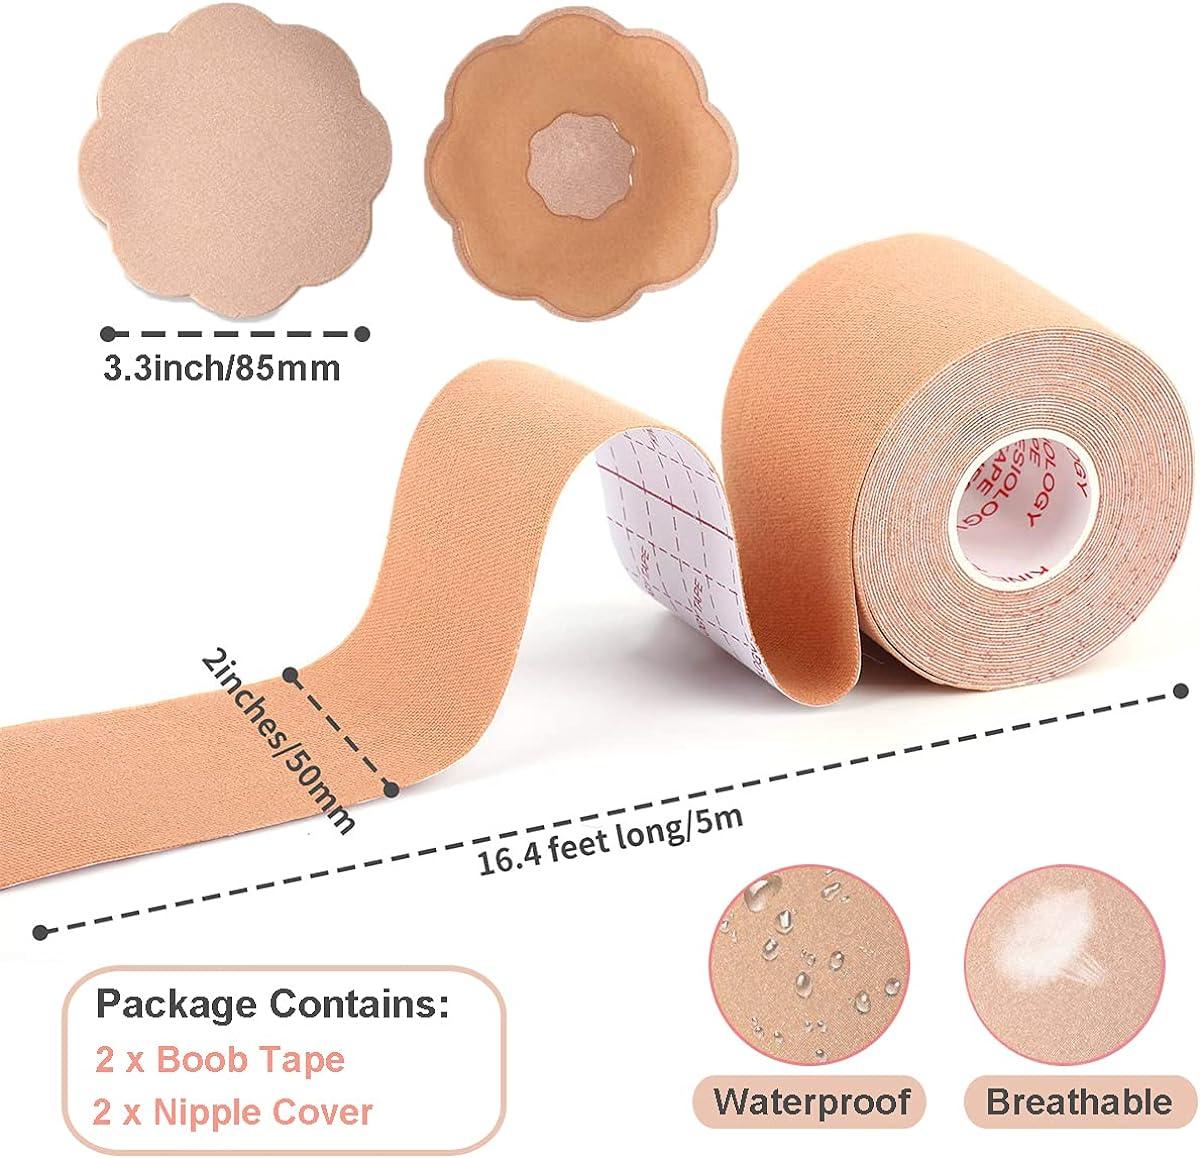 1 Invisible Chest Lift Tape Breathable Waterproof Body Tape -sagging Self- adhesive Lift Sports Bandage 